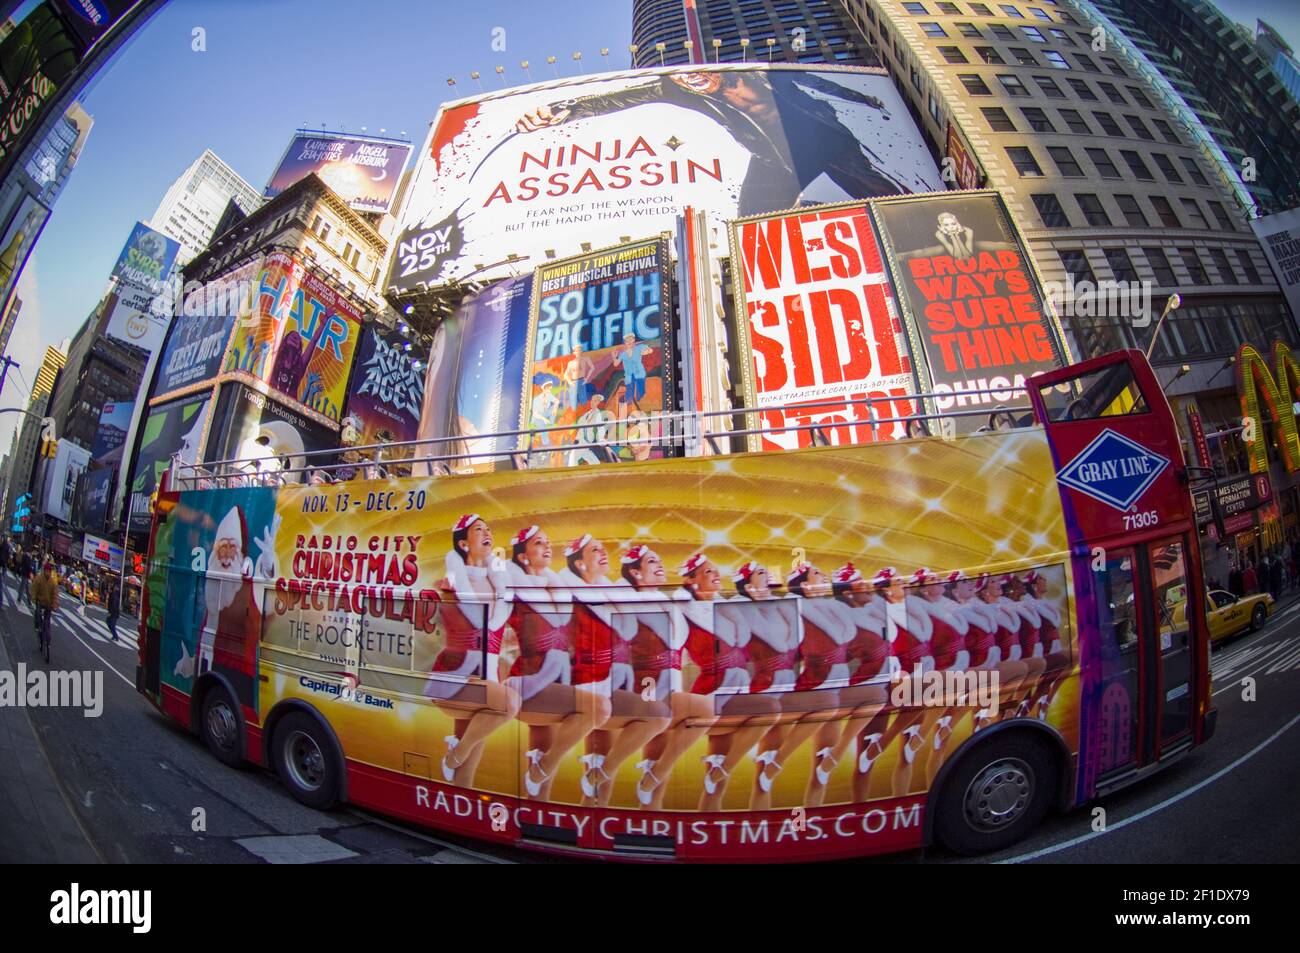 A tour bus advertises the Radio City Christmas Spectacular in Times Square  in New York on Friday, May 22, 2009. The Christmas Spectacular, featuring  The Rockettes dancers, has been canceled due to